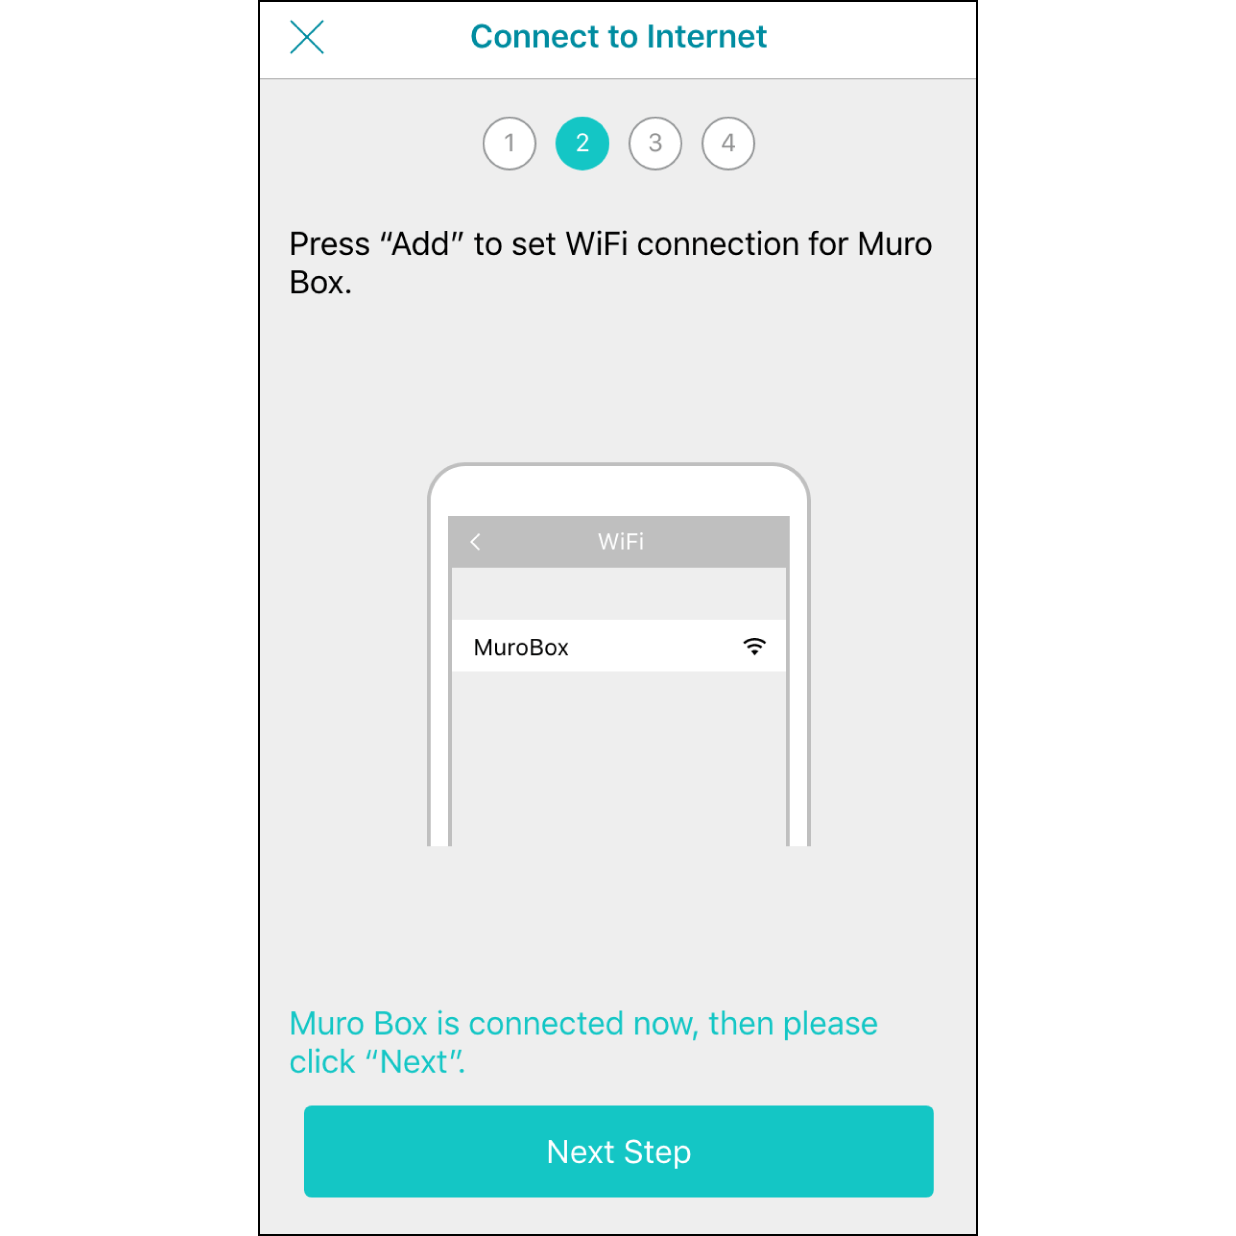 6. Connected to Muro Box Wi-Fi. After finishing the connection, it will indicate "Connected to Muro Box", then hit "Next Step".